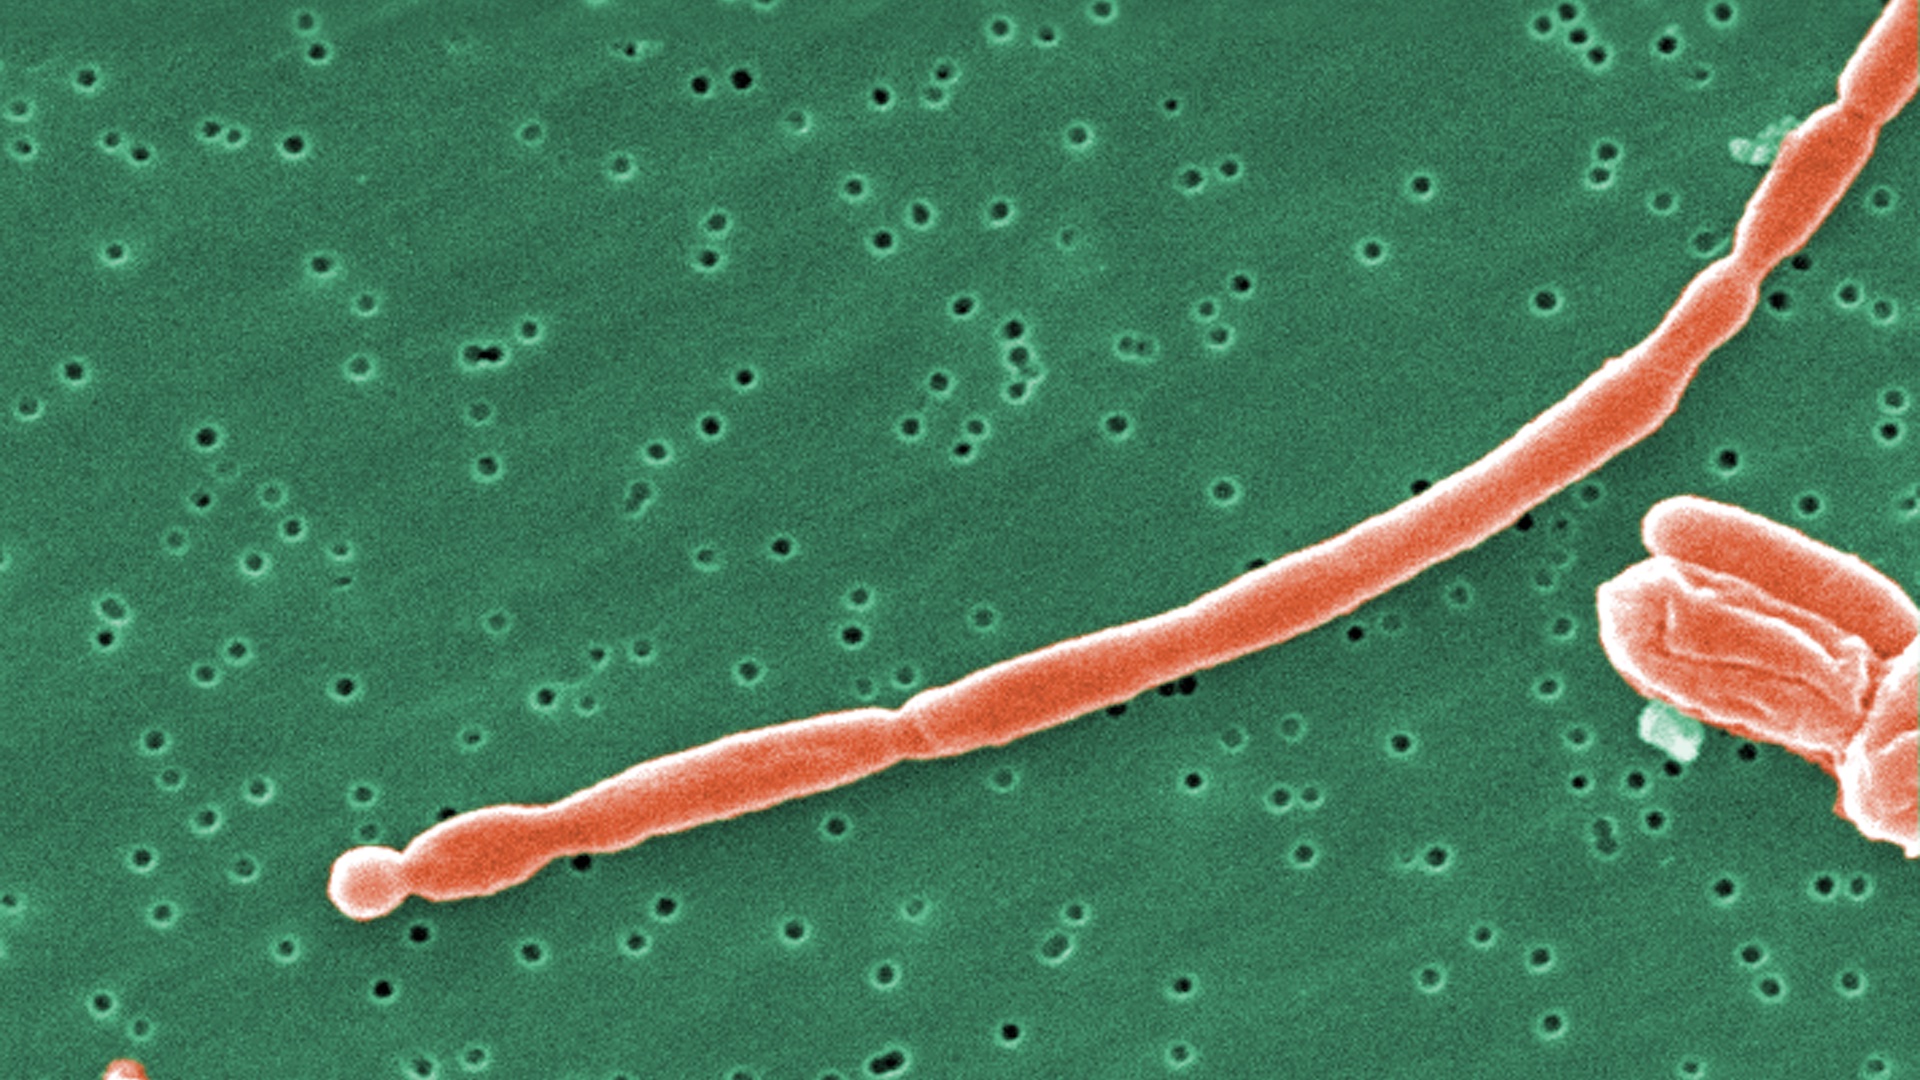 A rod-shaped E coli bacterial cell shown in orange against a green background